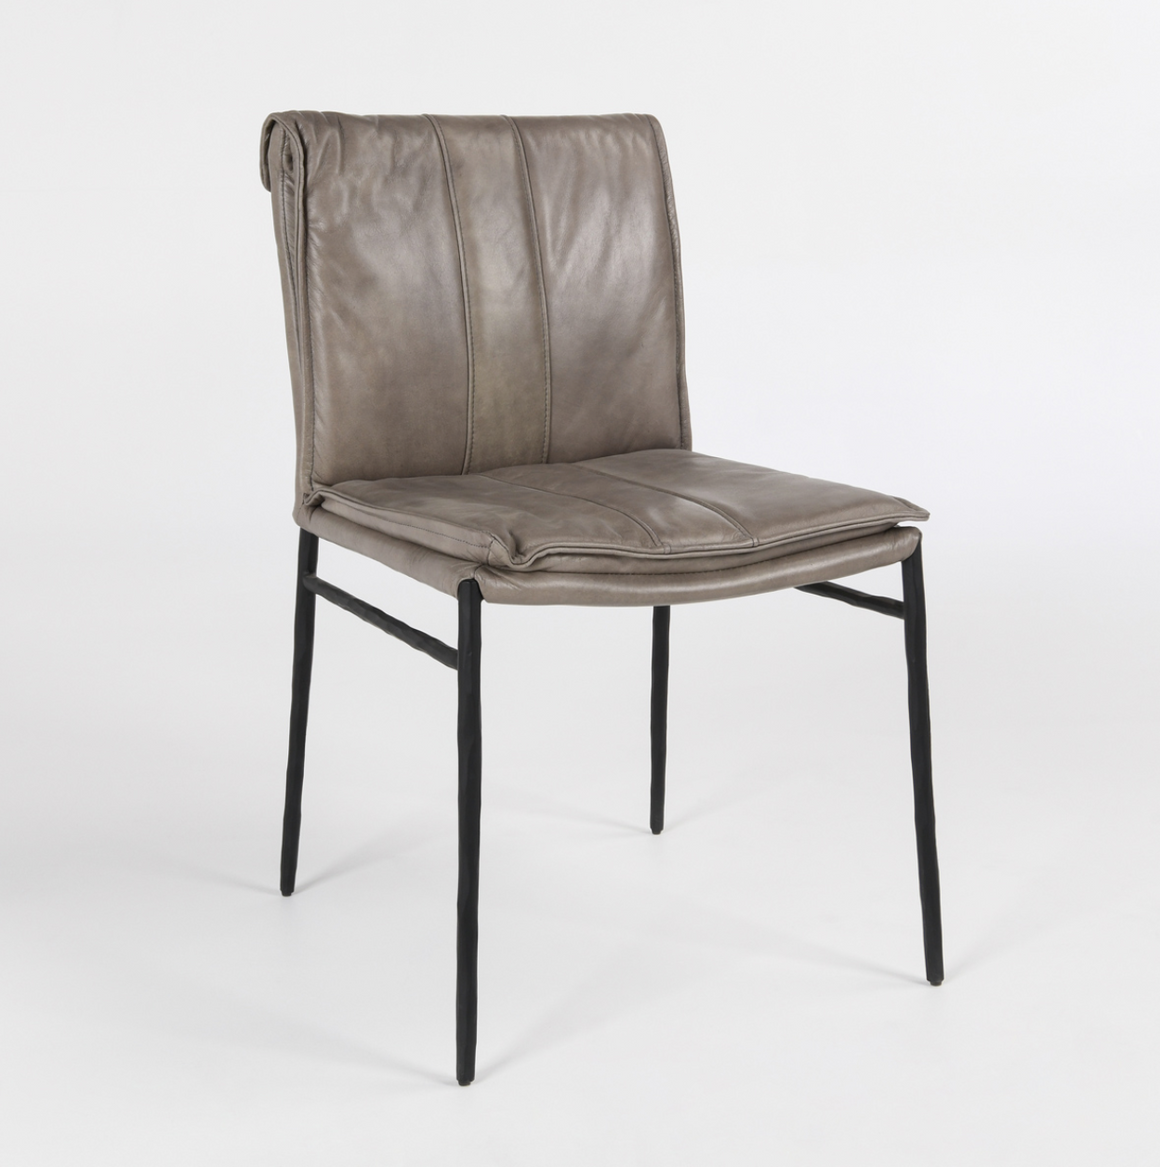 Wesley Top Grain Leather + Hammered Iron Dining Chair - Gray + Black